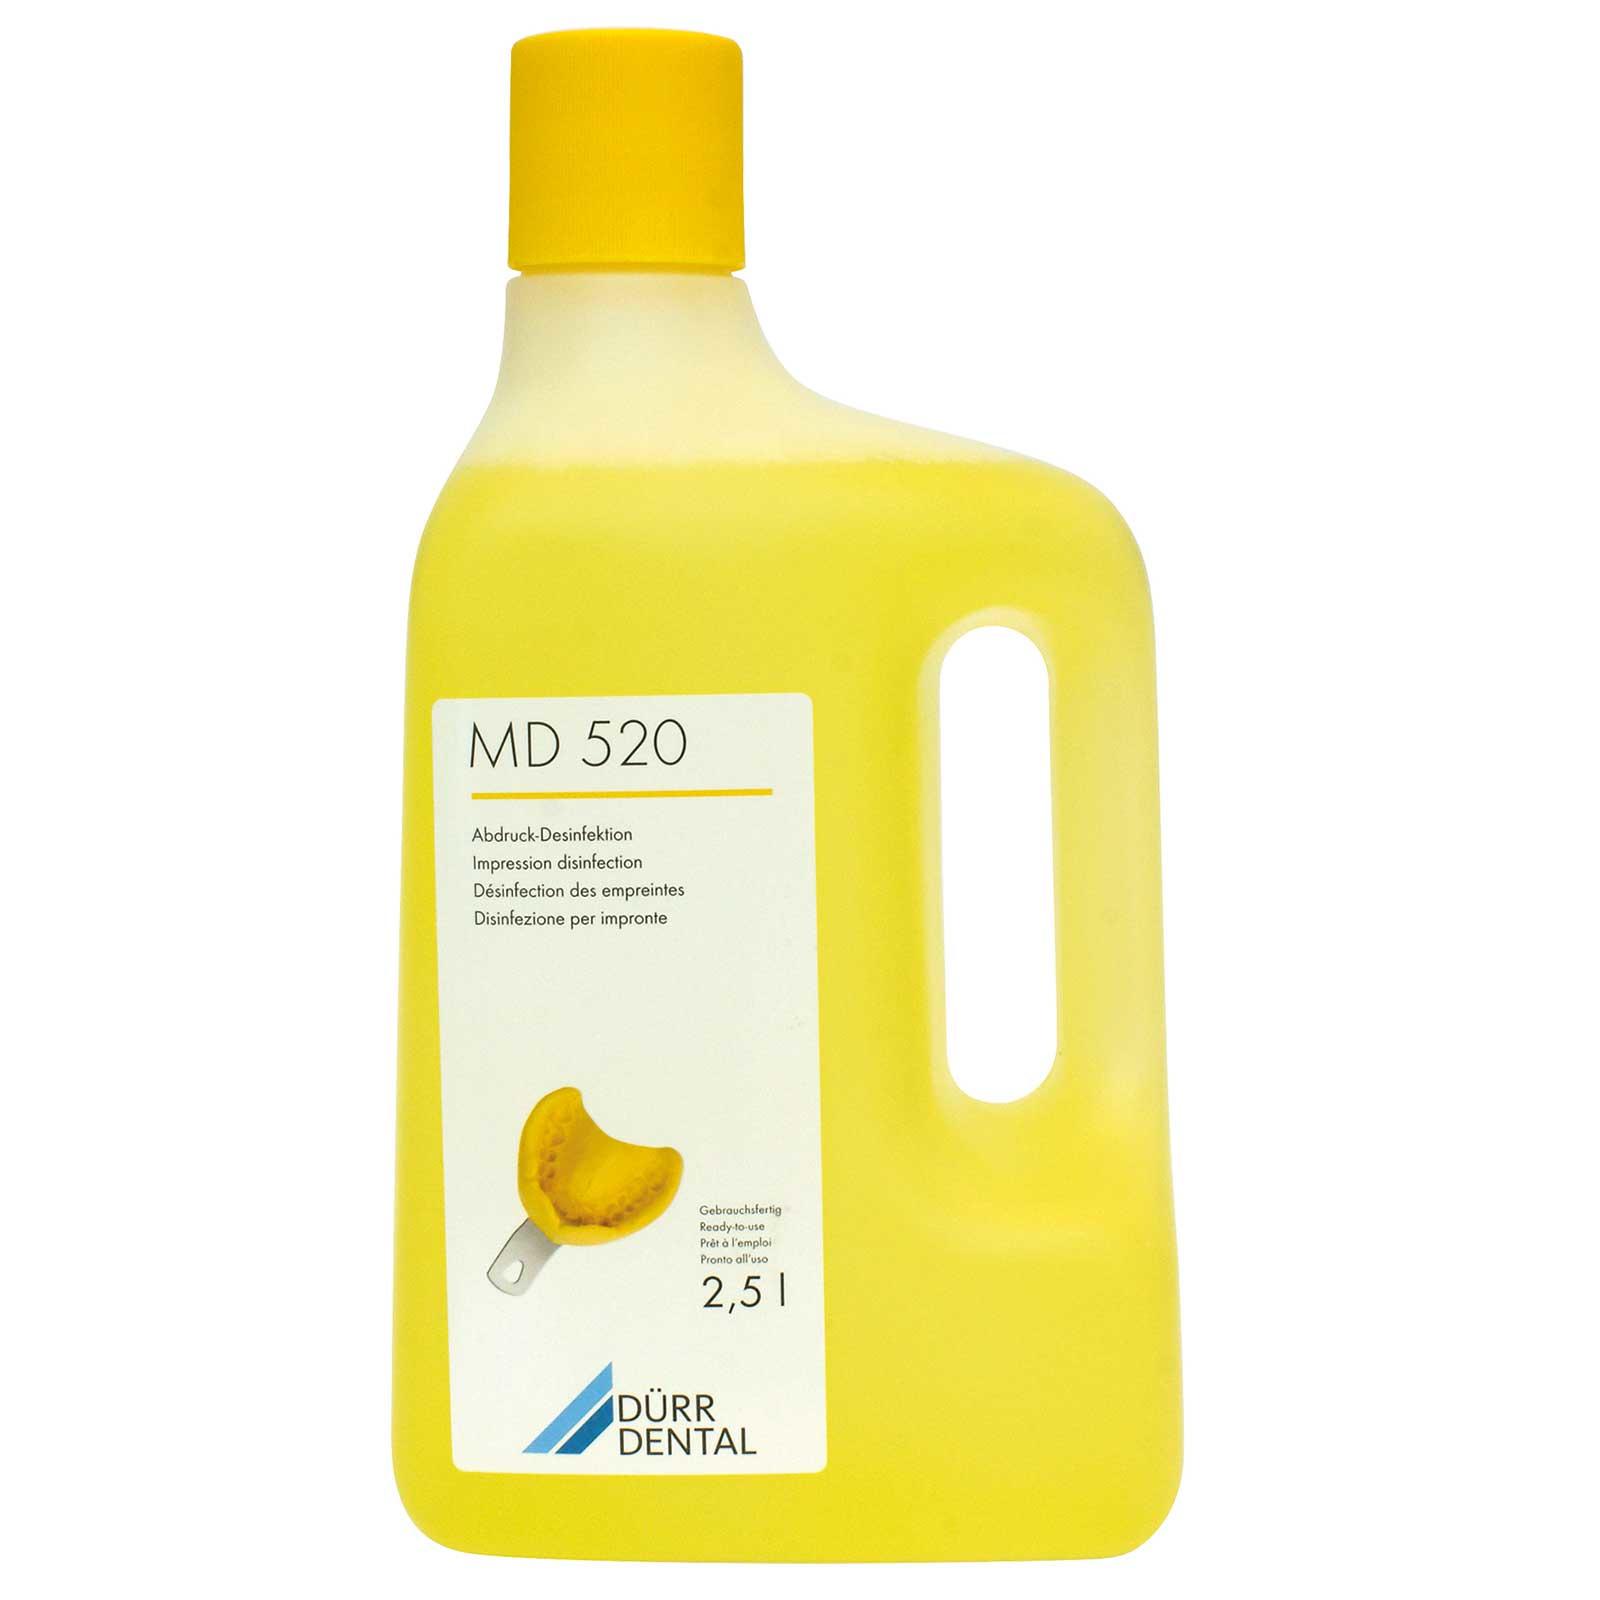 MD 520 IMPRESSION DISINFECTION